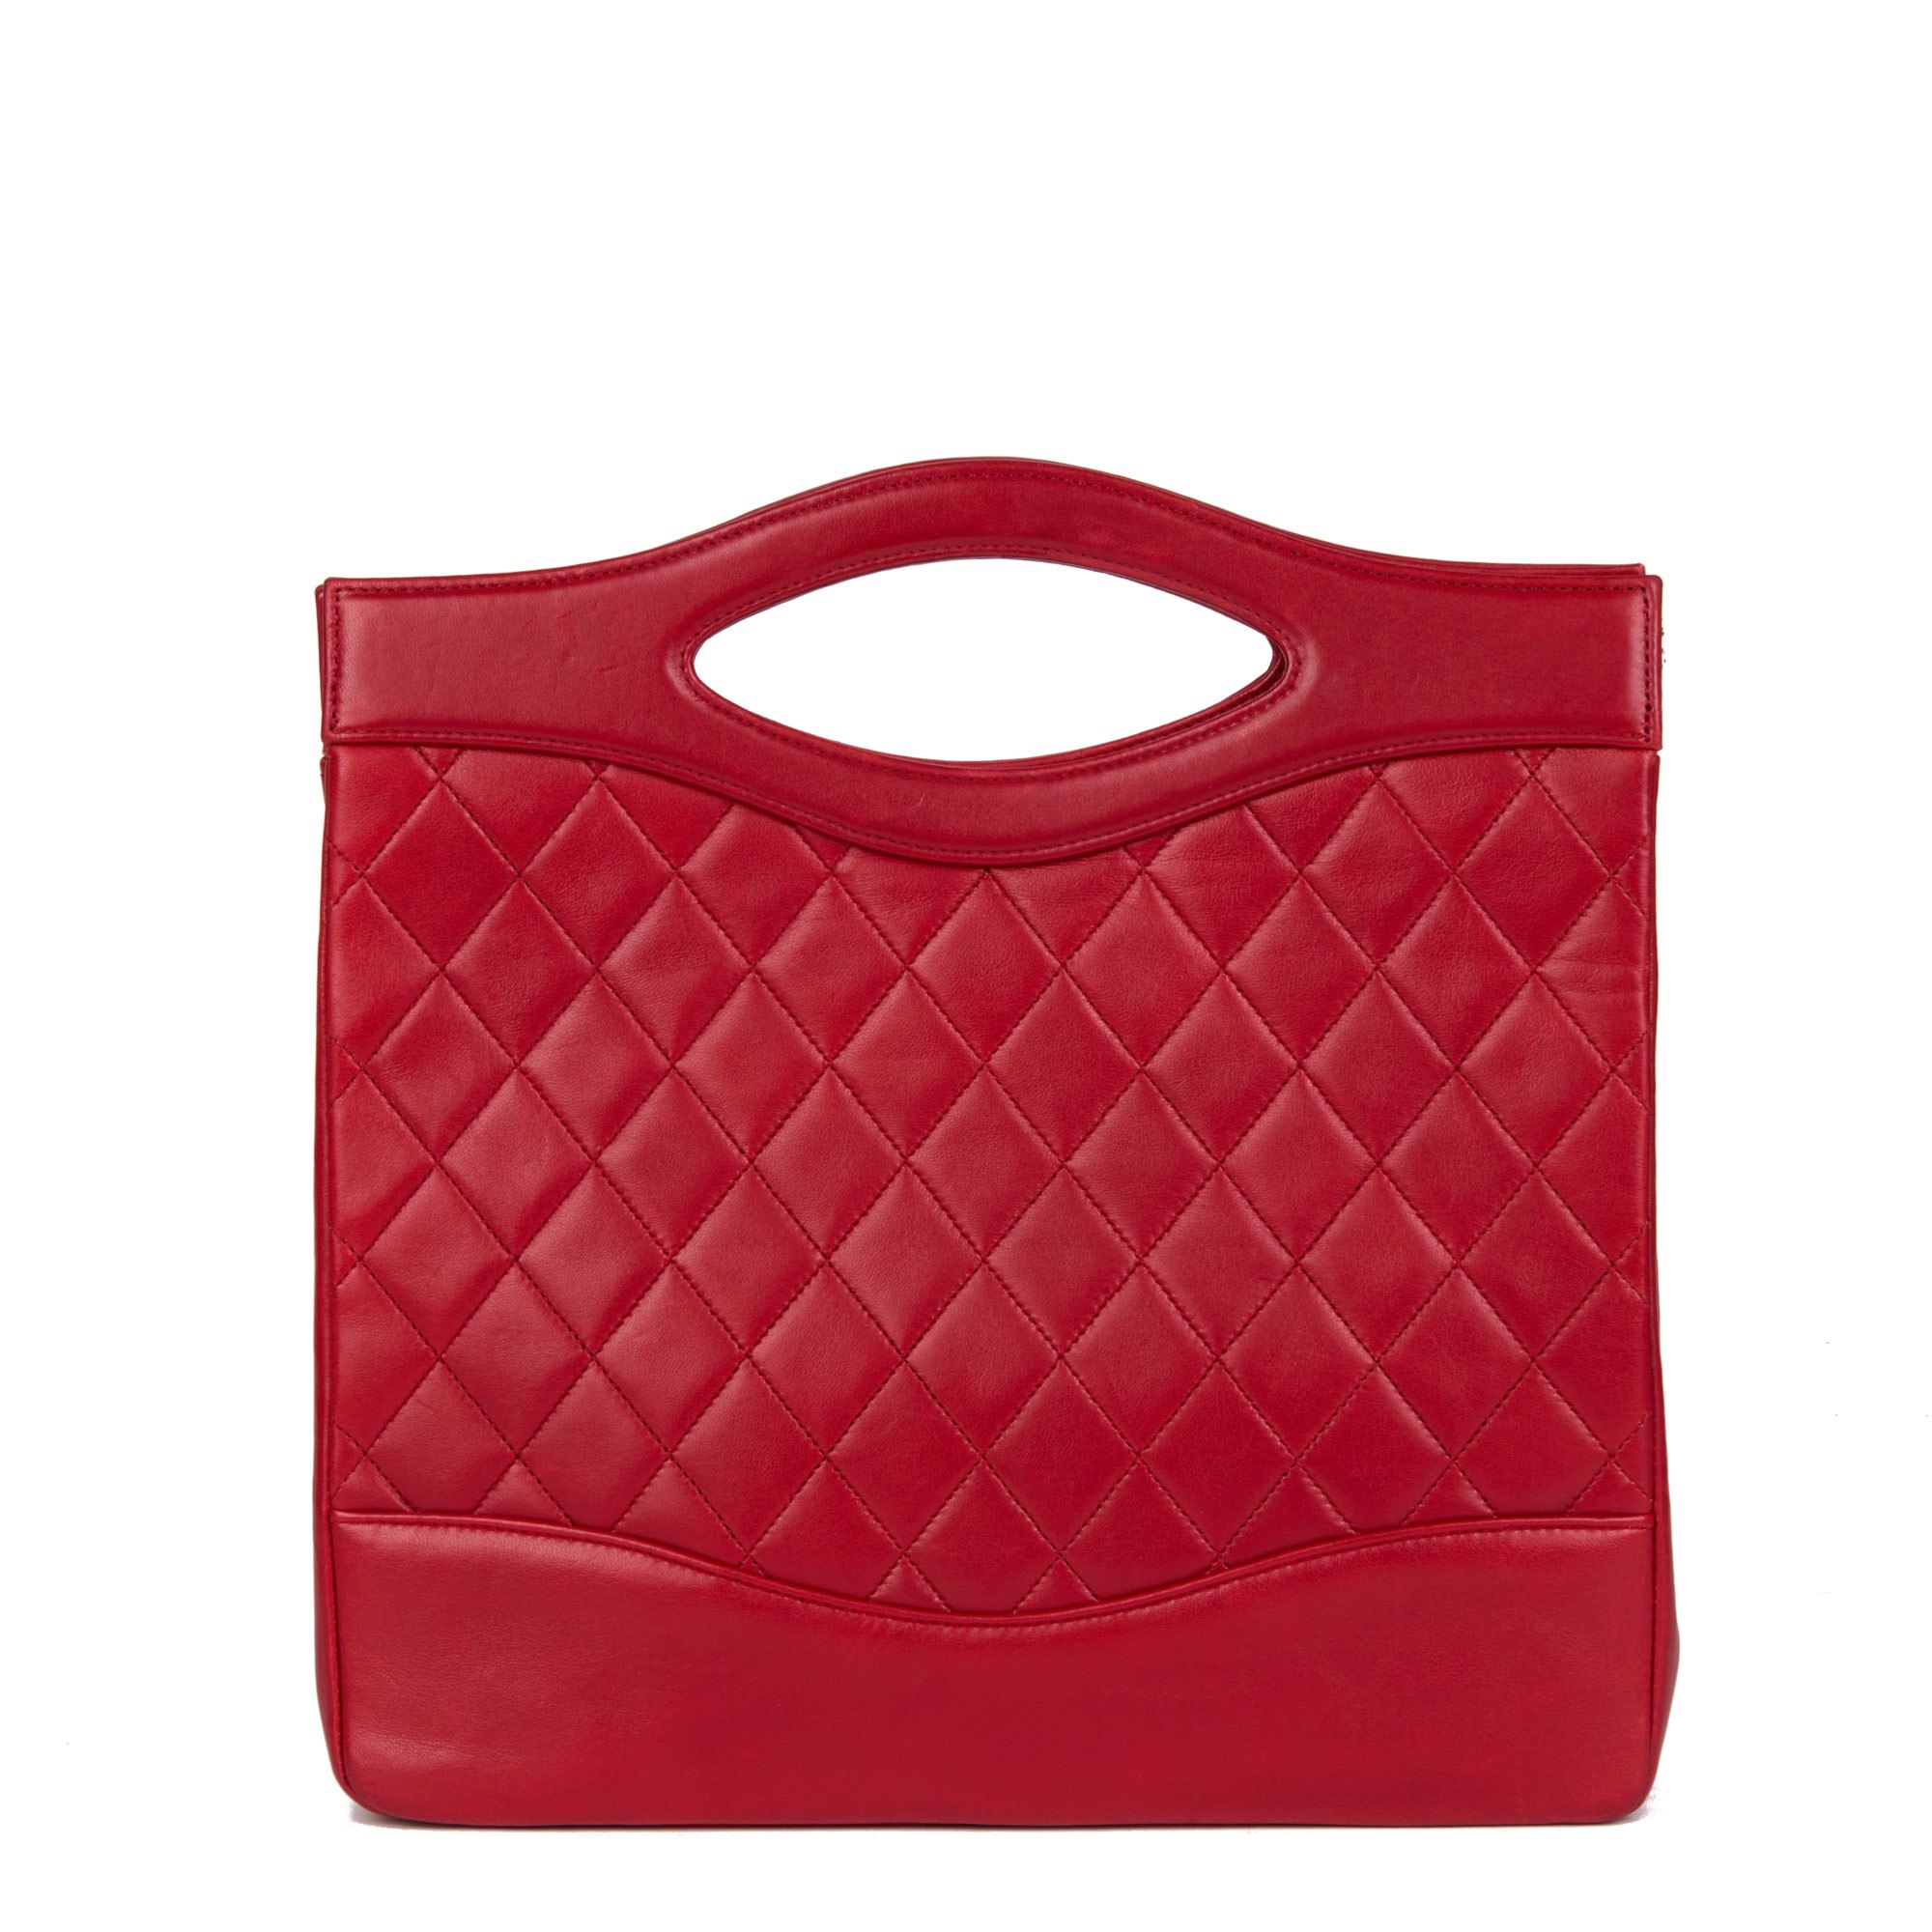 Chanel Red Quilted Lambskin Vintage Classic Shoulder Tote